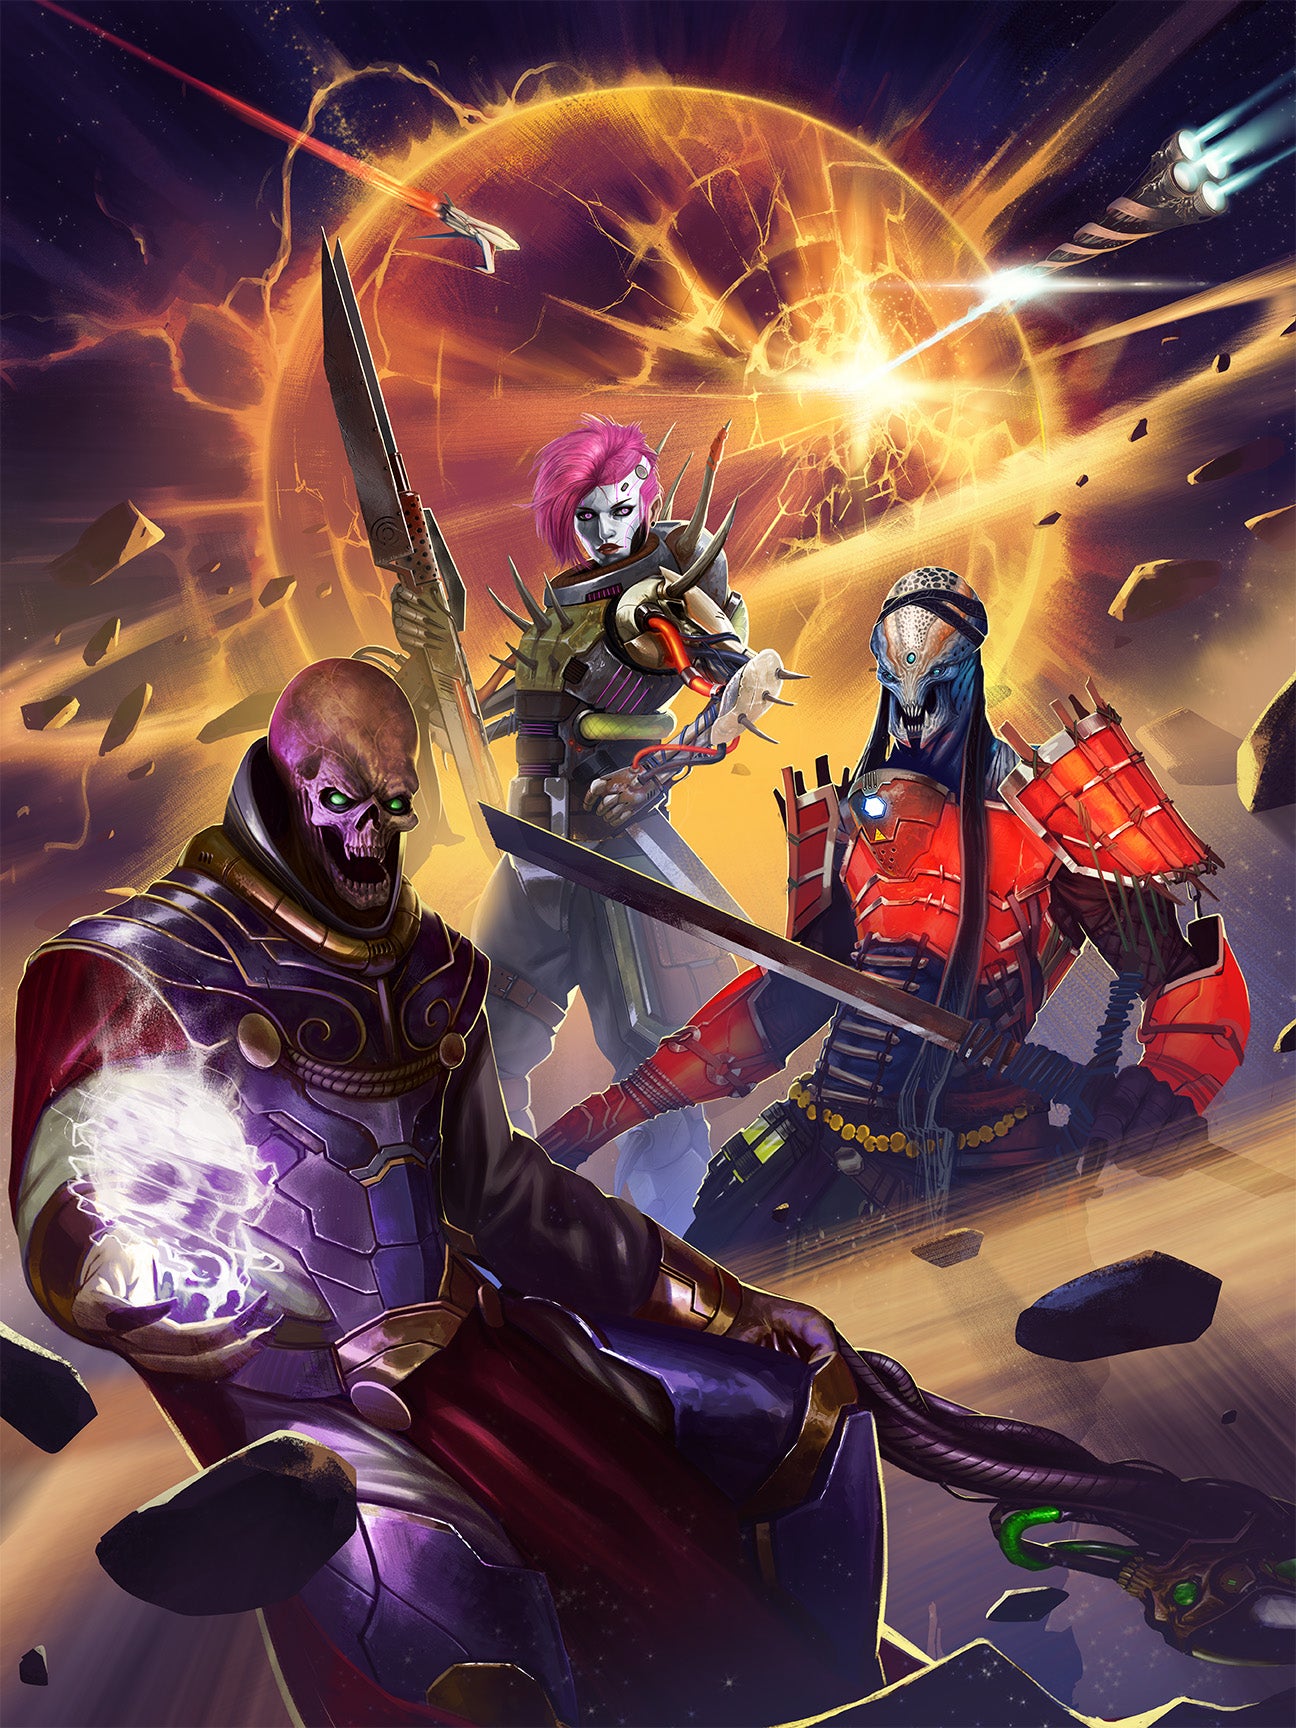  Three beings stand in the foreground with a planet exploding in the background. On the left if a humanoid with skull-like features, glowing green eyes, and a dark blue and gold armor, in the middle is a pale humanoid with spiked armor and bright pink hair, to the right is a humanoid in red armor with blue skin and mandibles protruding from their jaw